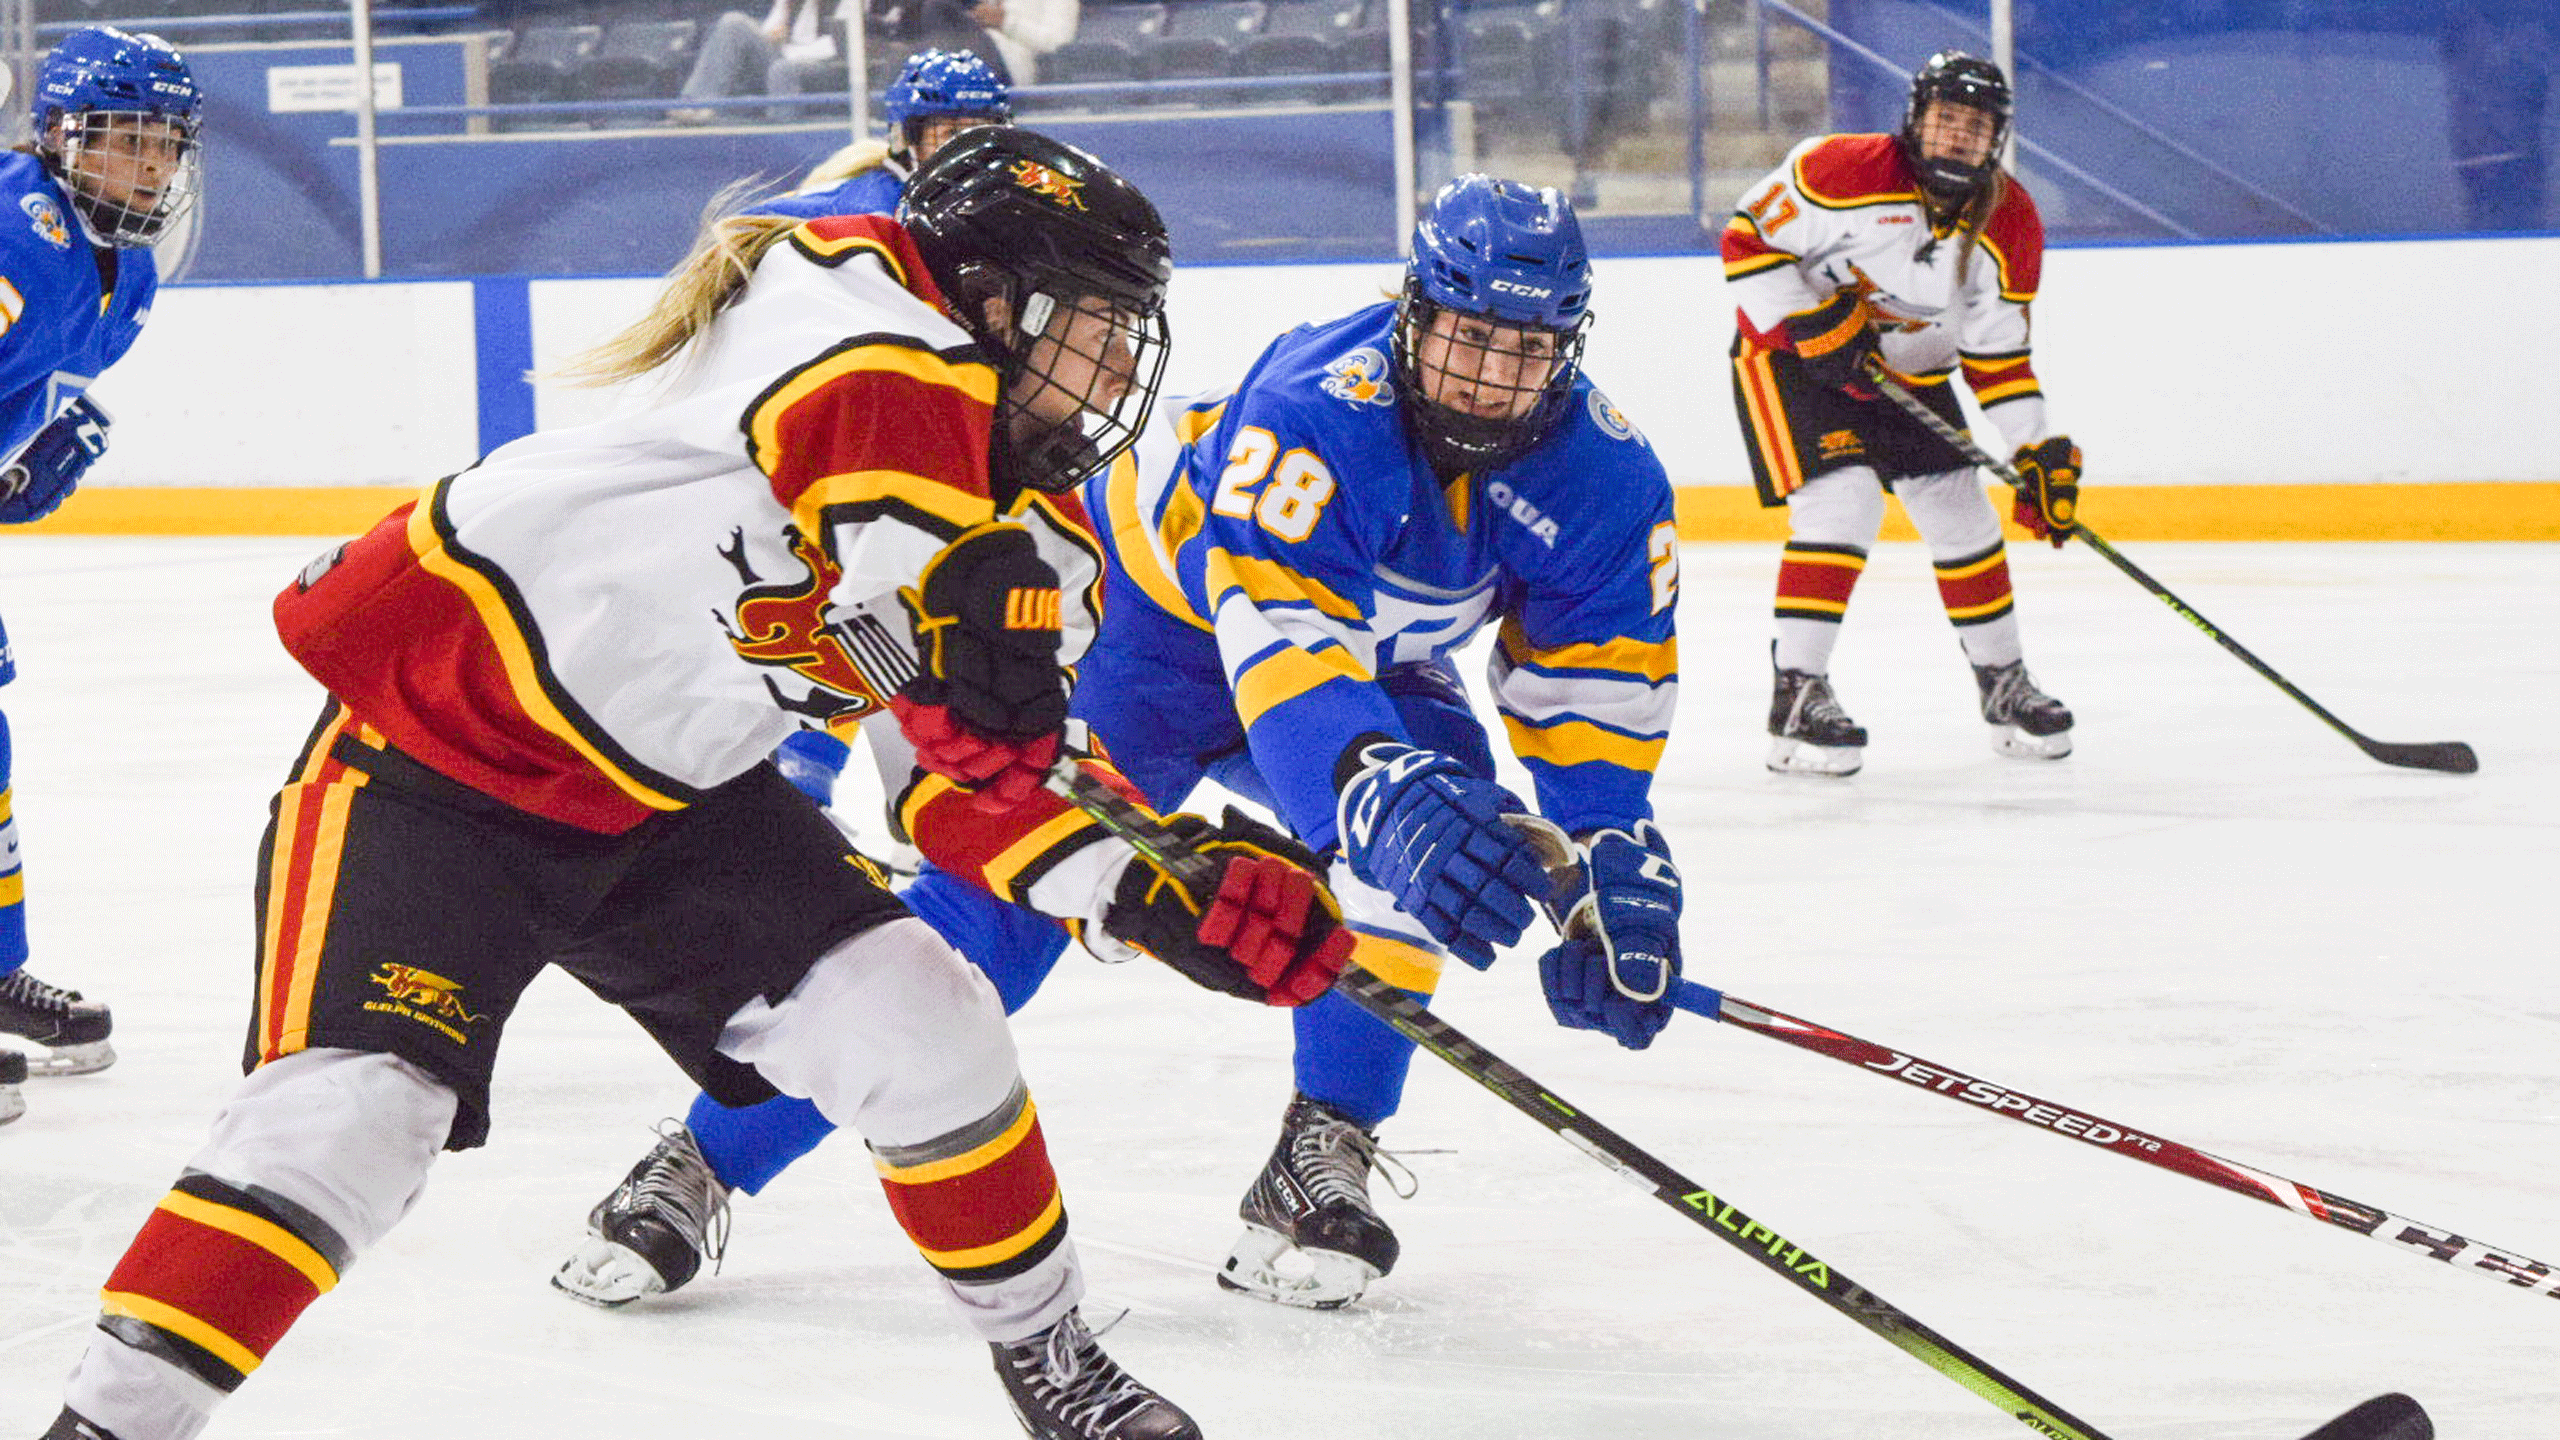 A Rams women's hockey player in a blue jersey chases down the puck